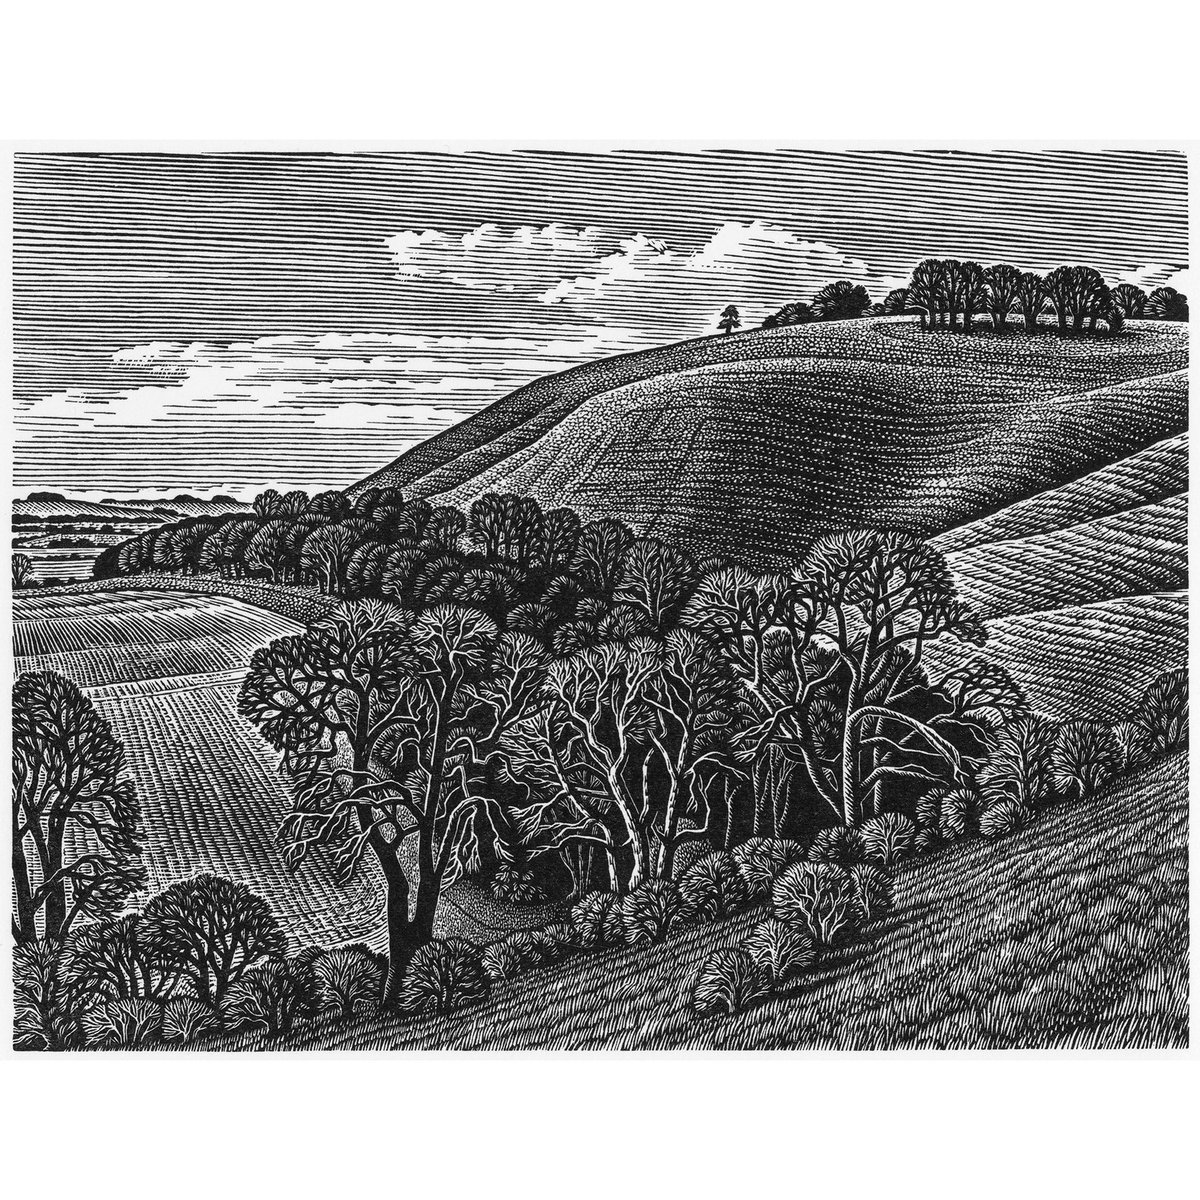 Howard Phipps - Martinsell Hill, Vale of Pewsey- from the 86th SWE Annual Exhibition, reopening on 9th March at Northern Print, Newcastle. Engravings are also available from our website. societyofwoodengravers.co.uk #printmaking #woodengraving